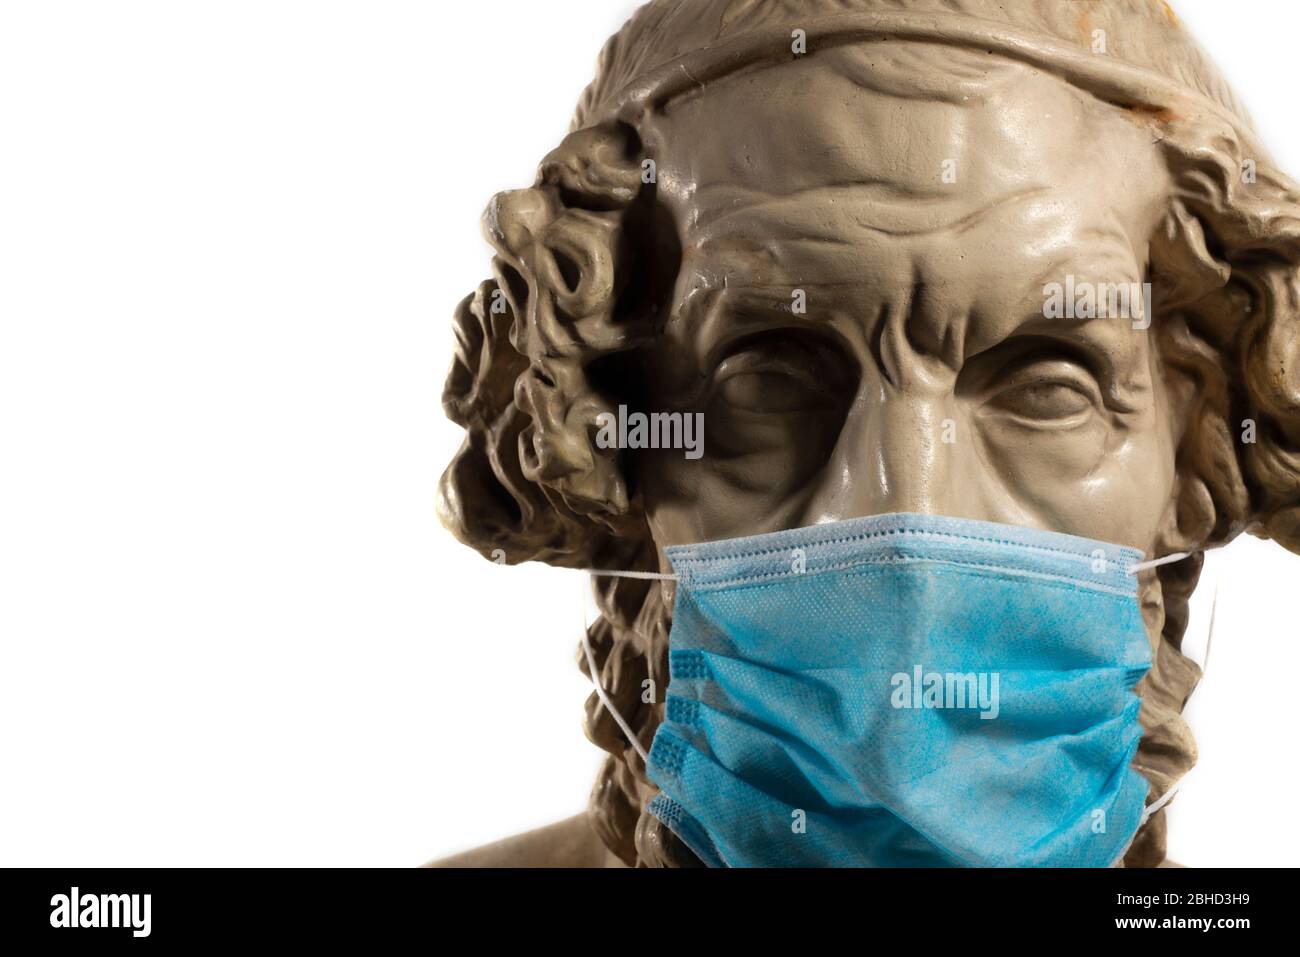 Gypsum Copy of Ancient Statue Homer Wearing Virus Face Mask Stock Photo